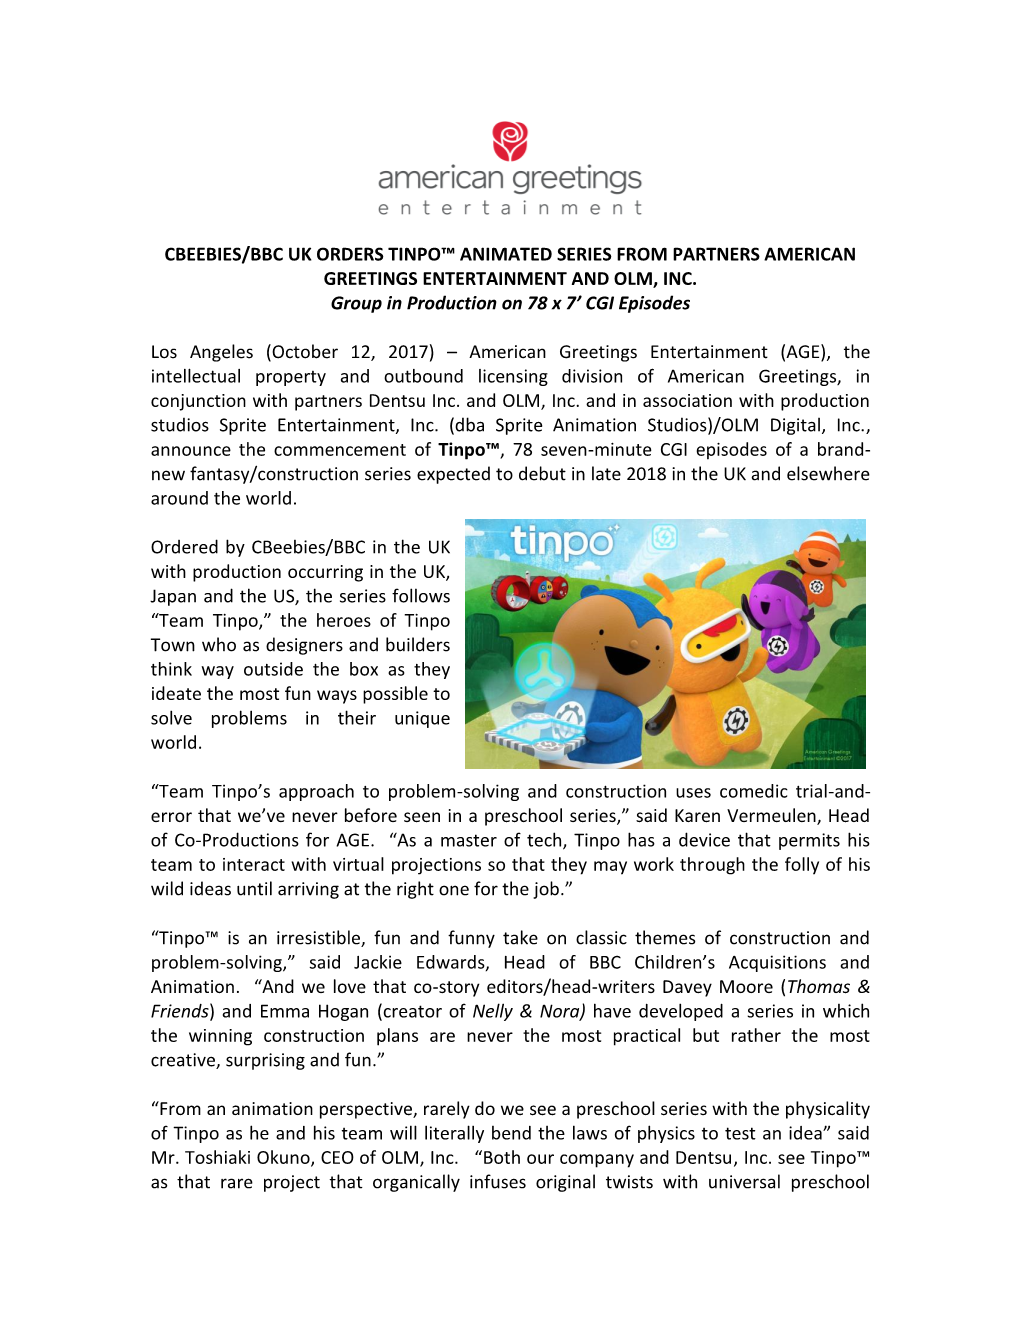 Cbeebies/Bbc Uk Orders Tinpo™ Animated Series from Partners American Greetings Entertainment and Olm, Inc